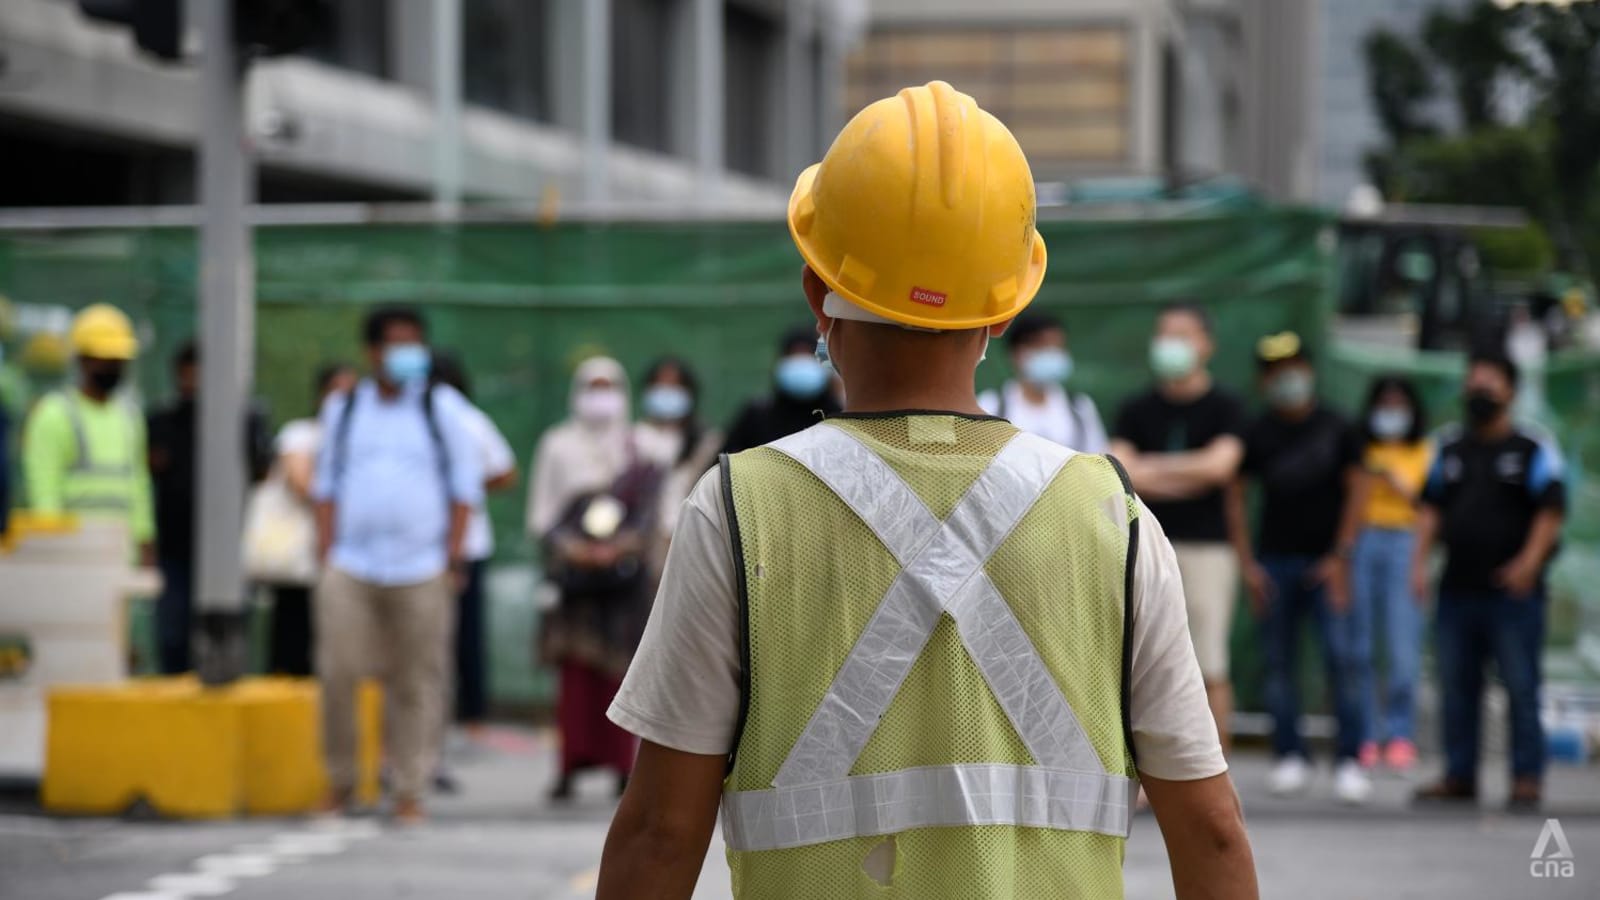 workplace-safety-breaches-double-to-more-than-9,000-in-first-six-months-of-2022:-mom